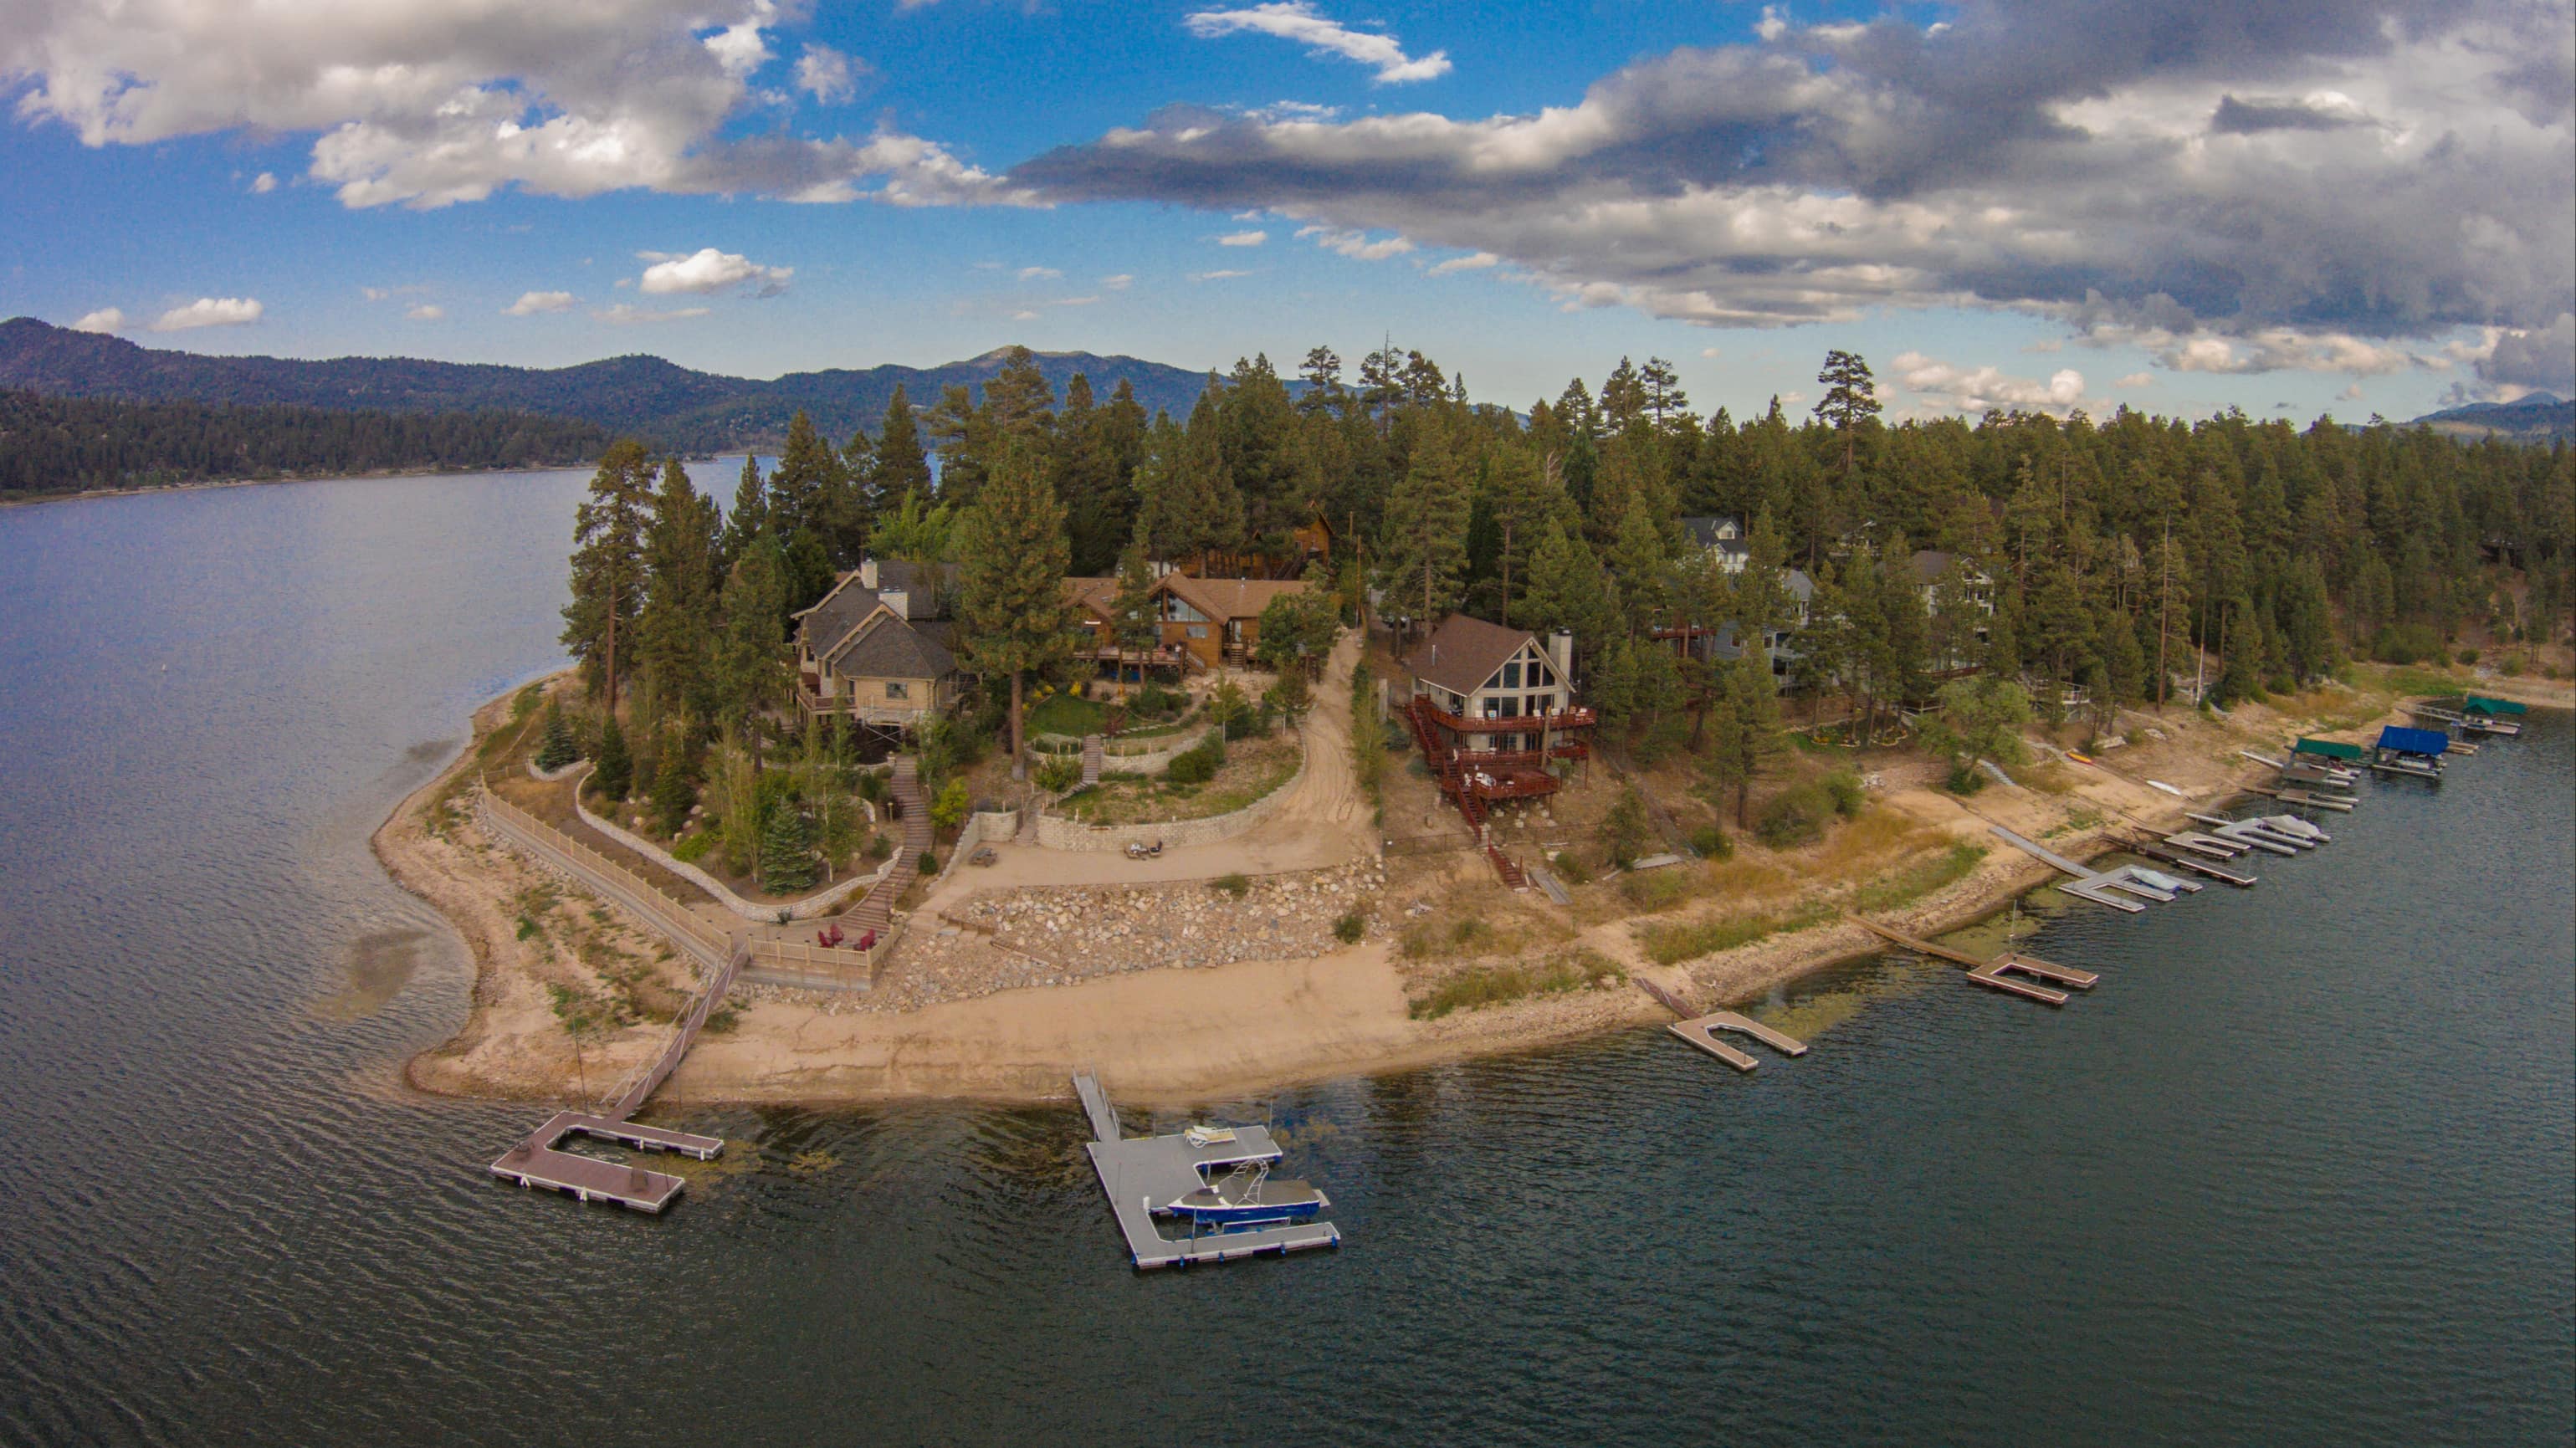 Where to find the best lakefront rentals in California